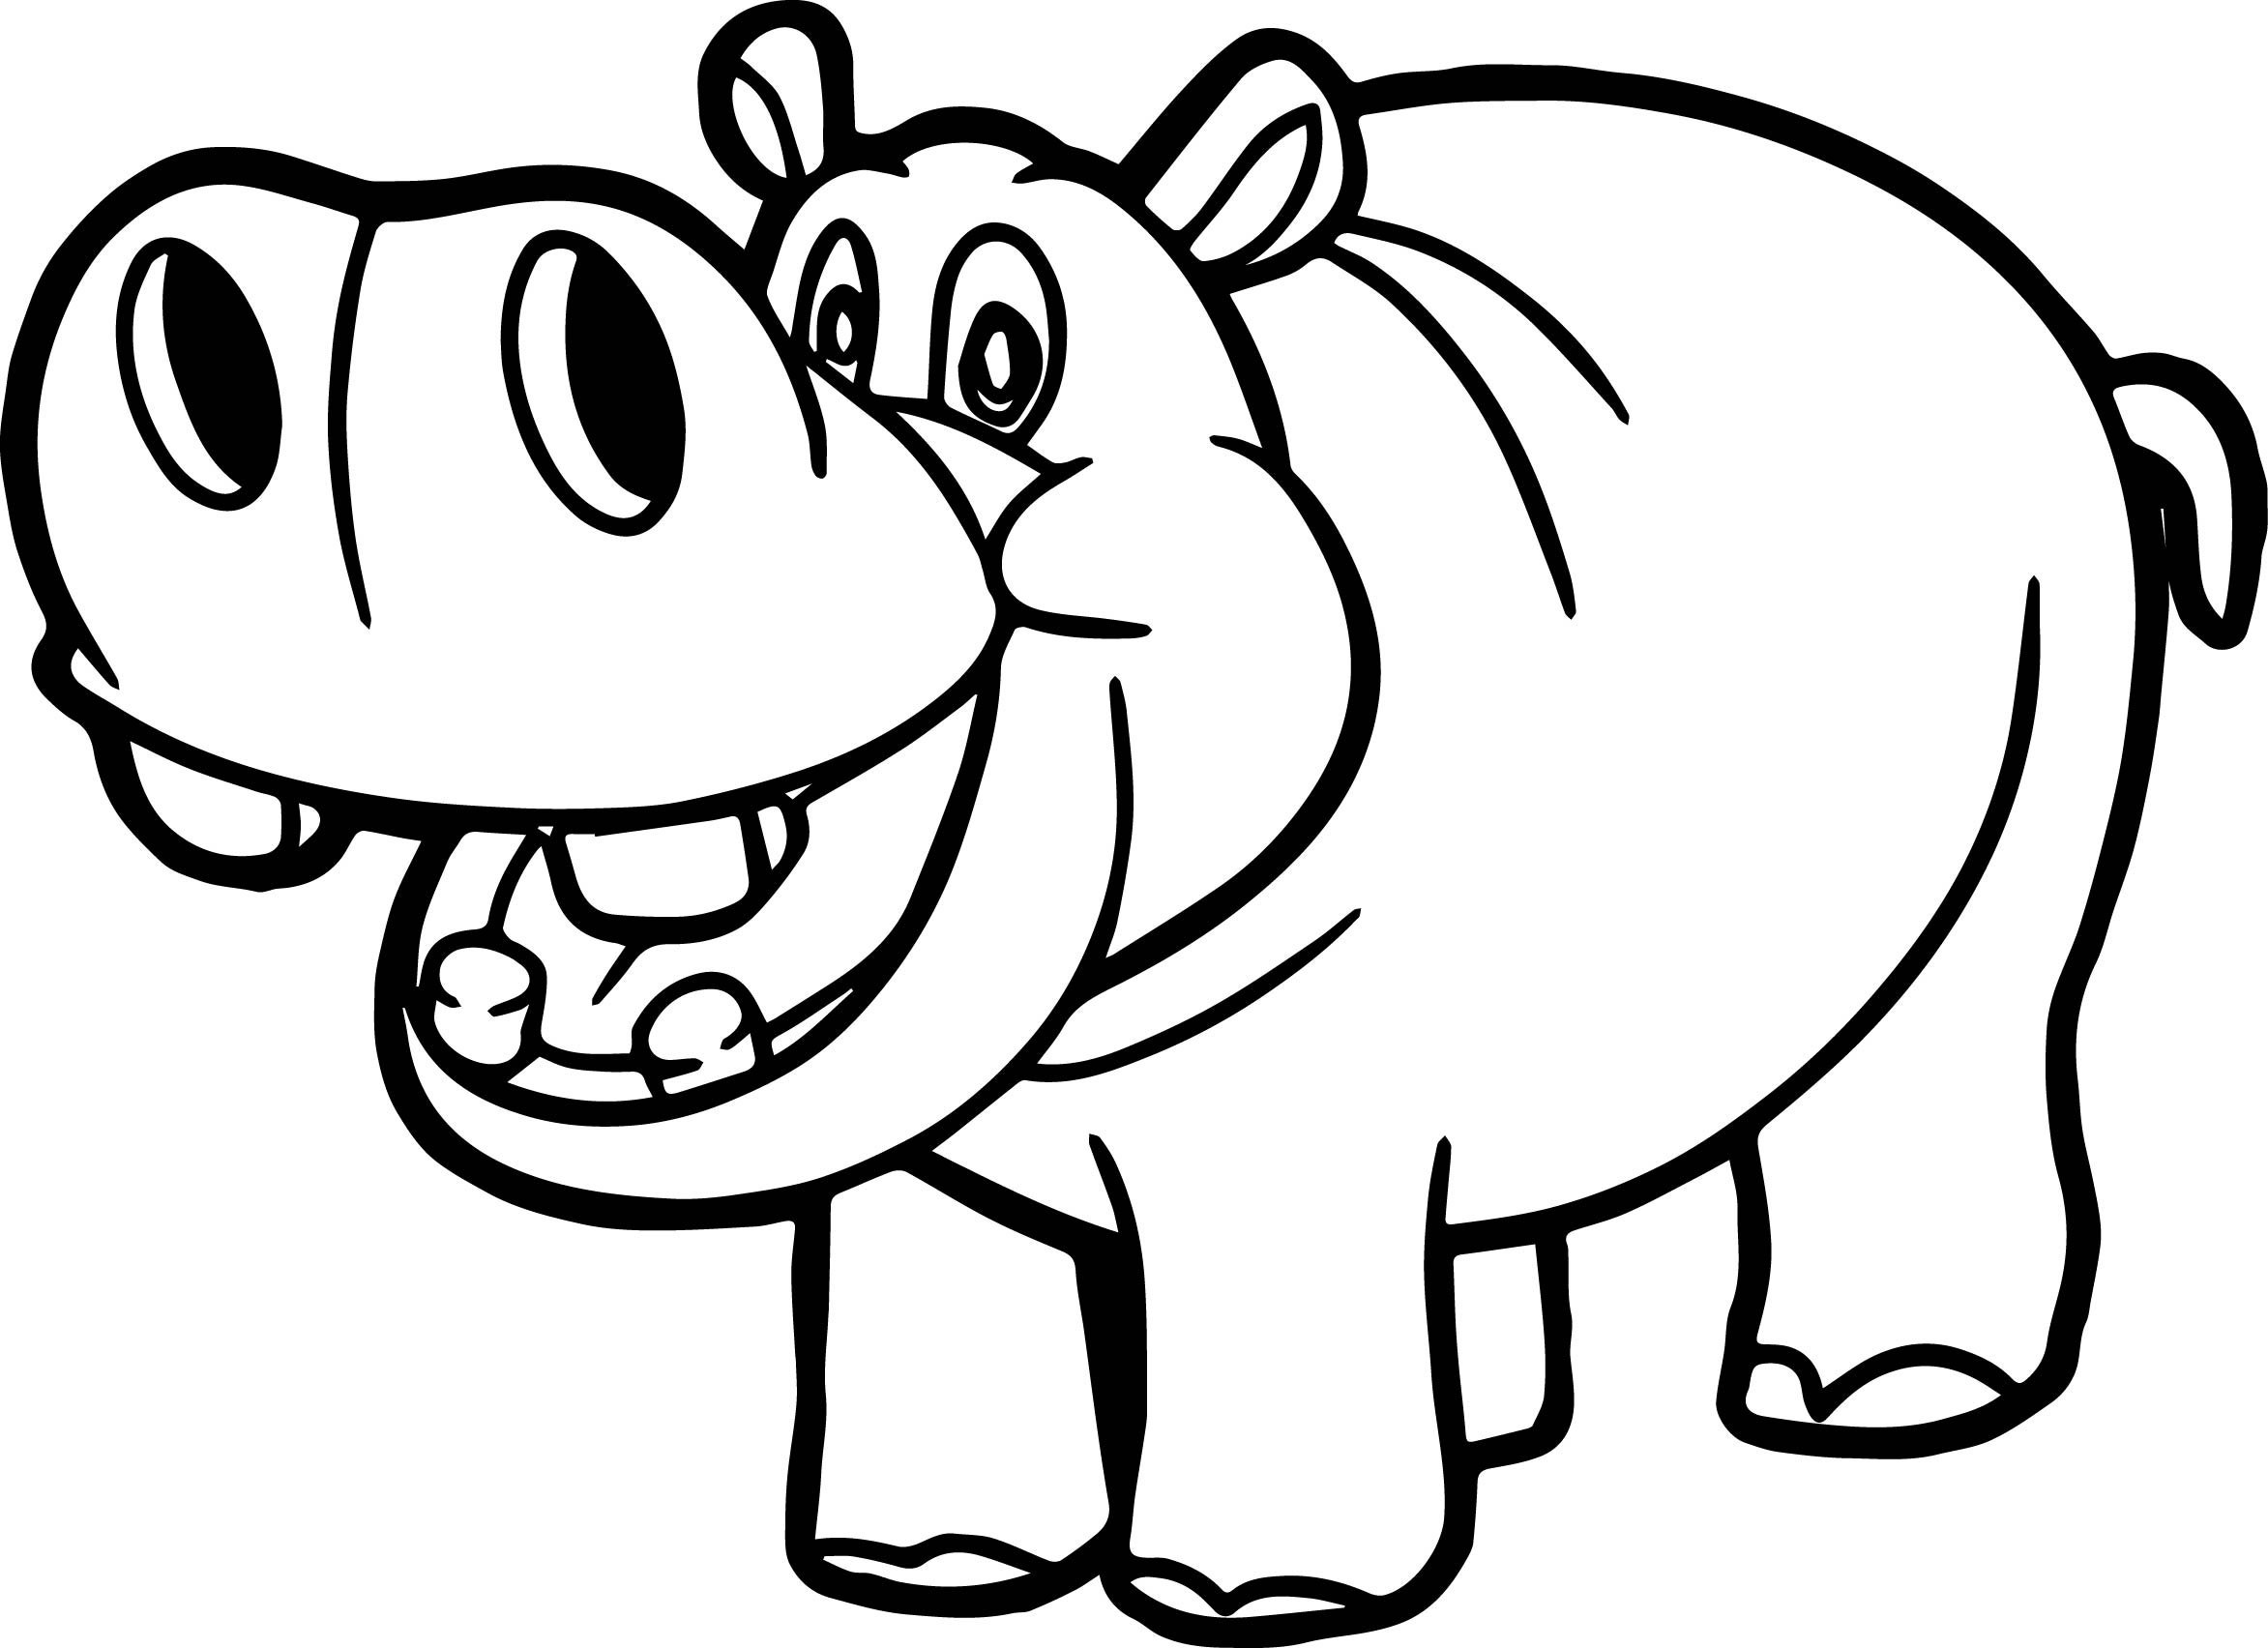 funny-hippo-smiling-coloring-page-free-printable-coloring-pages-for-kids